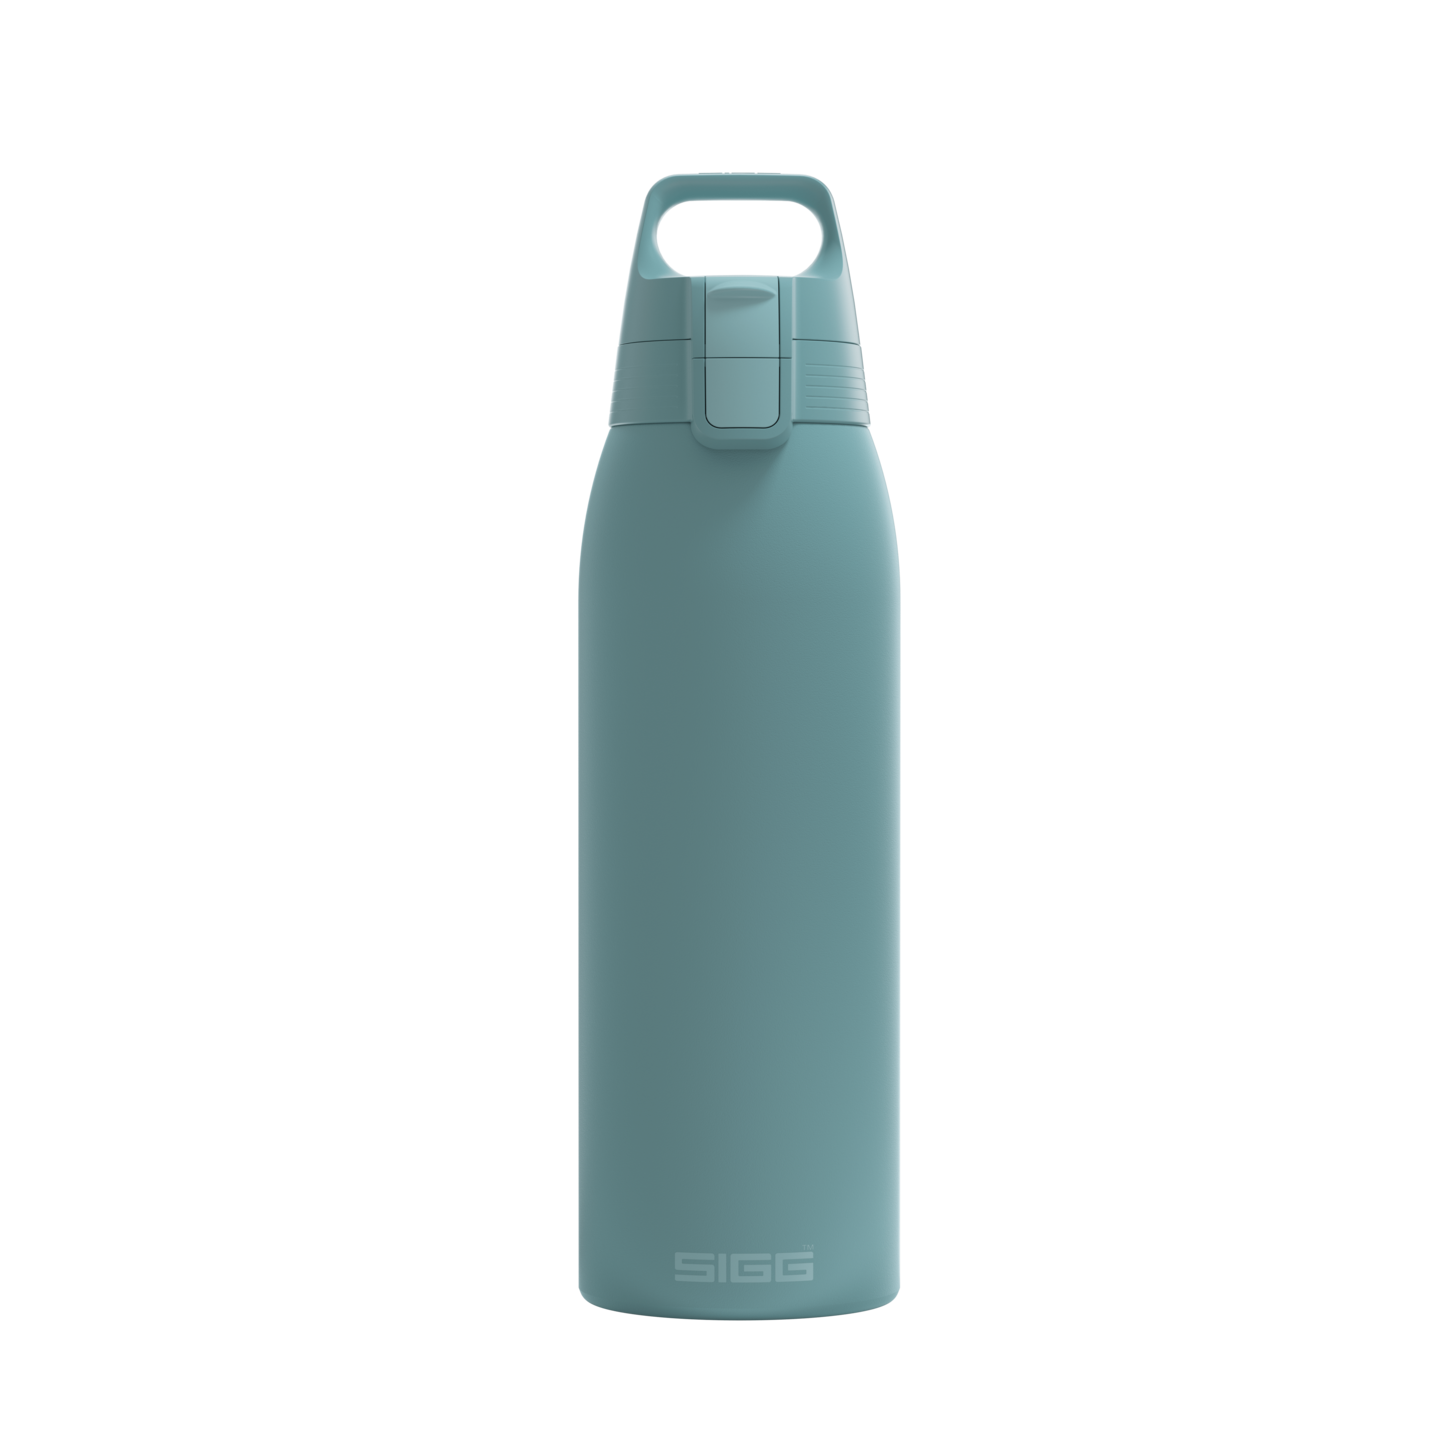 Shield Therm One Morning Blue 1.0 L